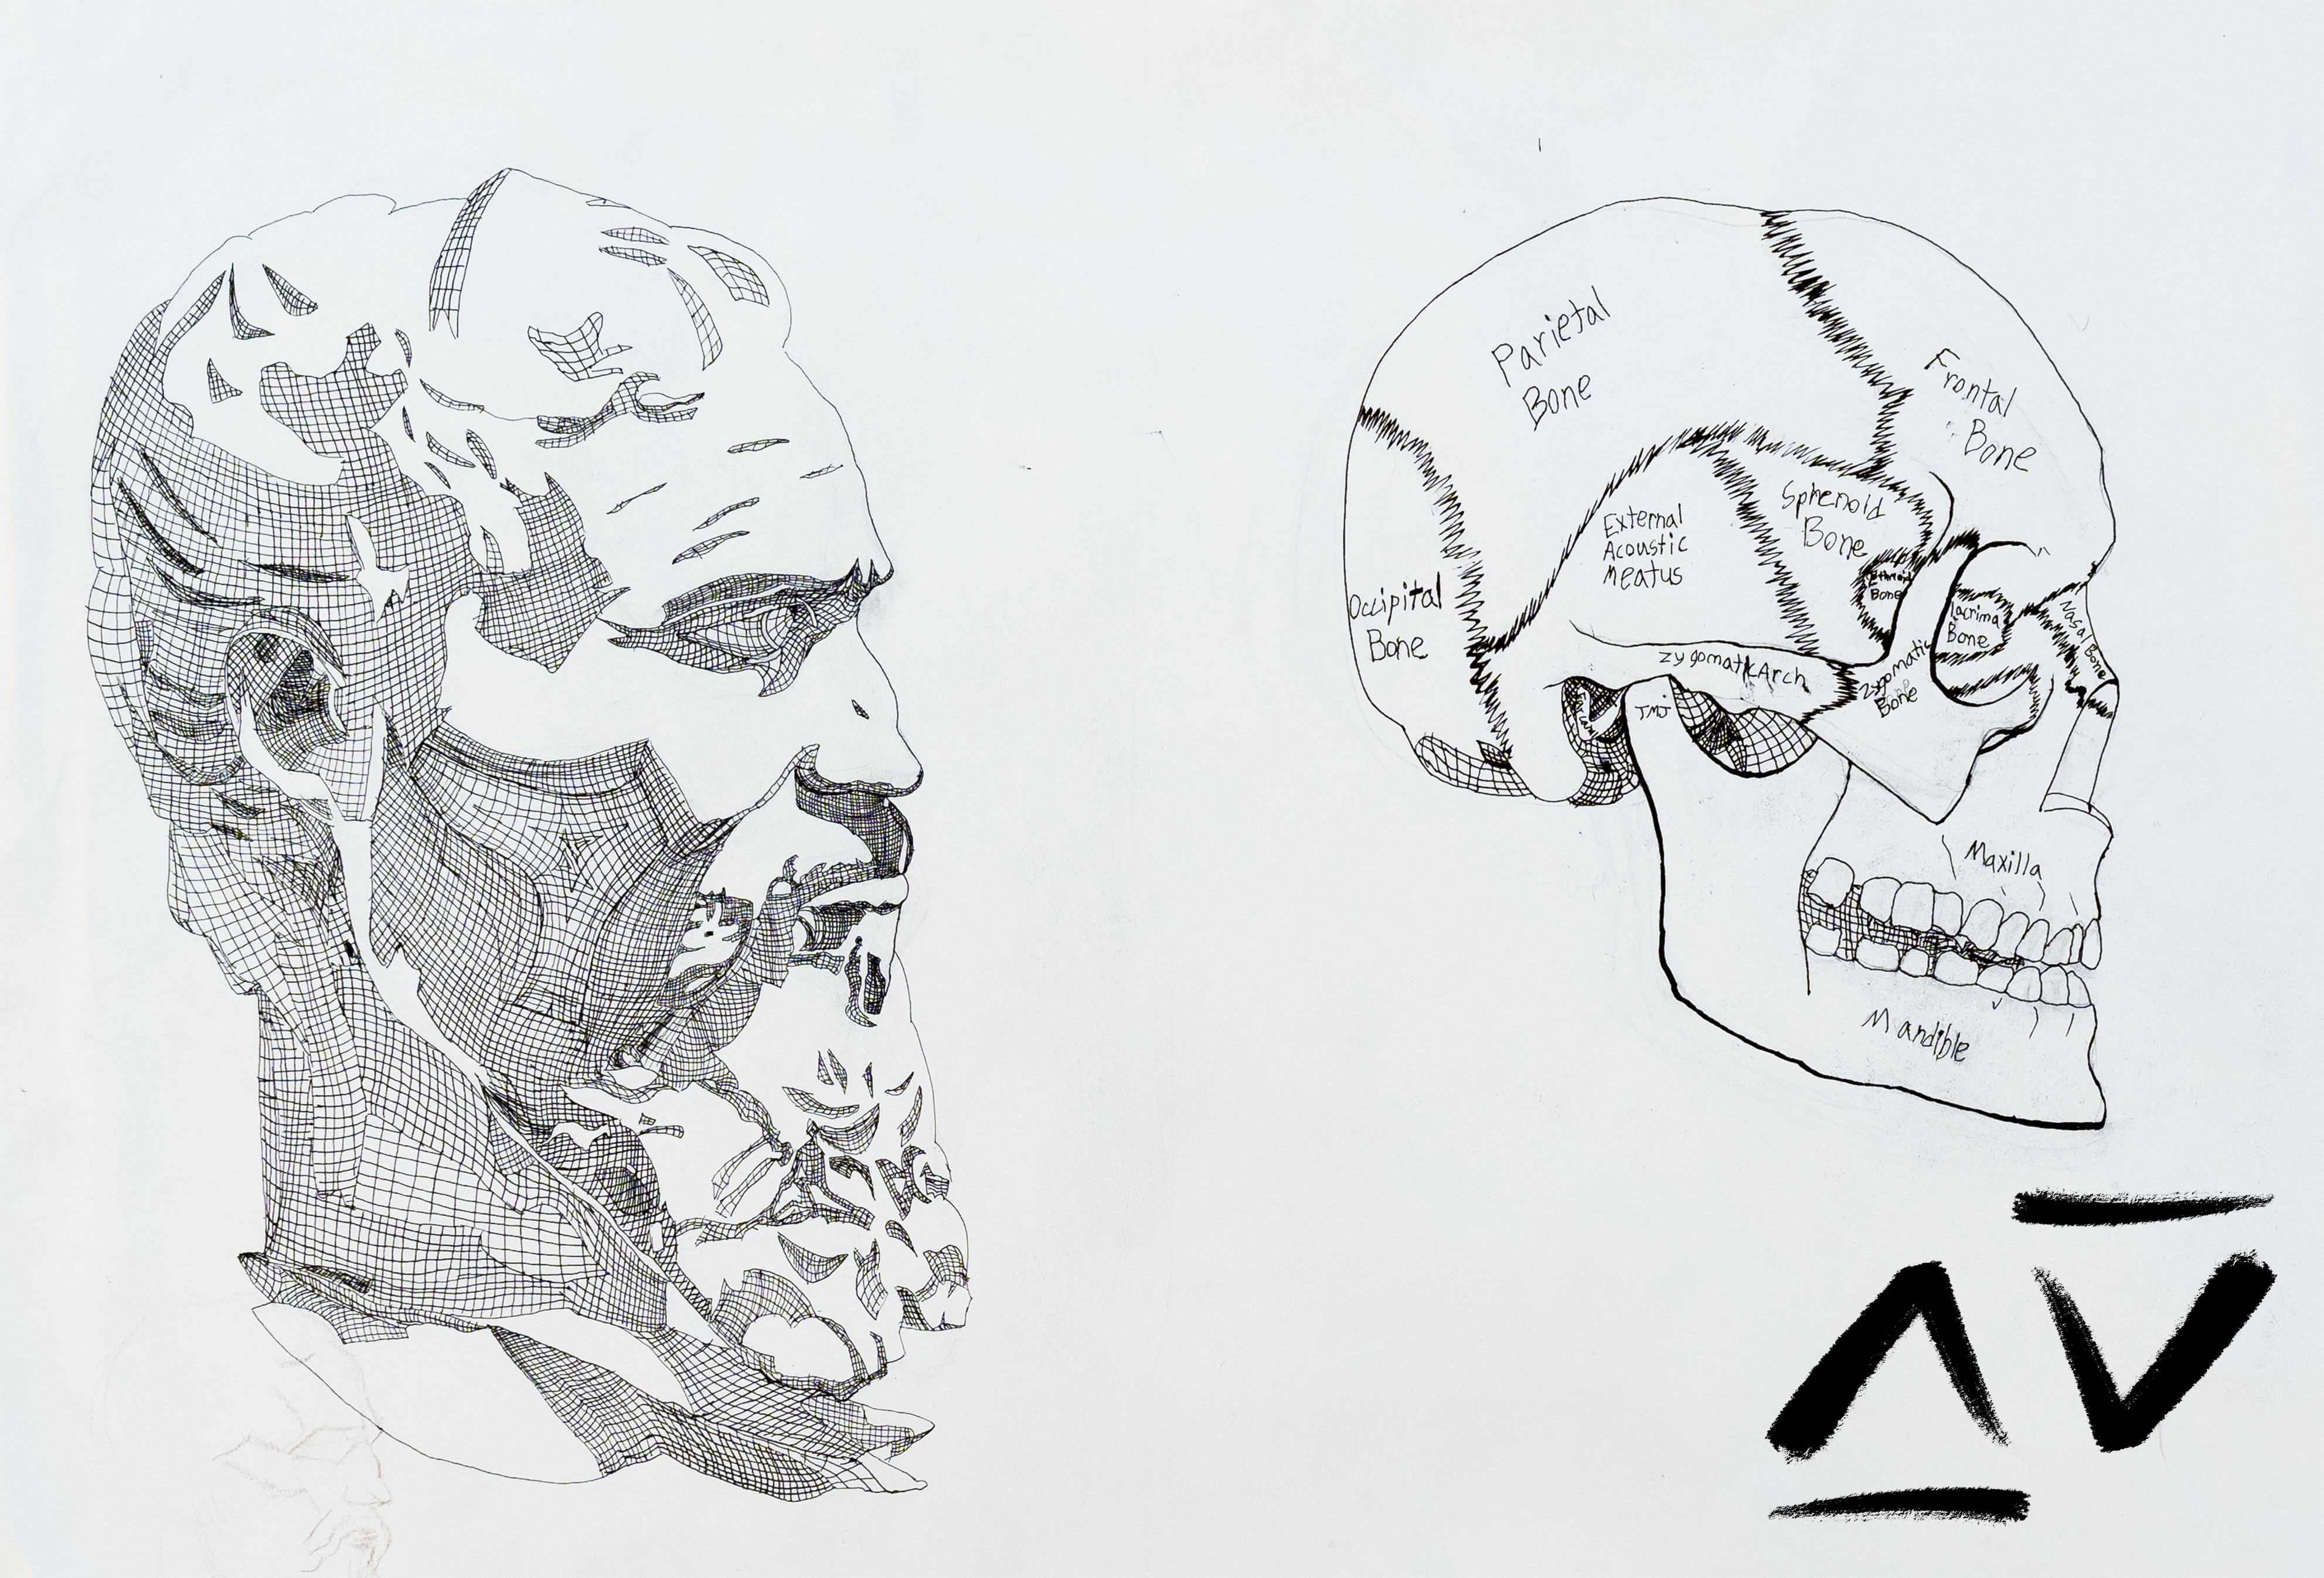 A drawing of a statue of Michelangelo, next to it is a skull with labels for the different bones in the skull.